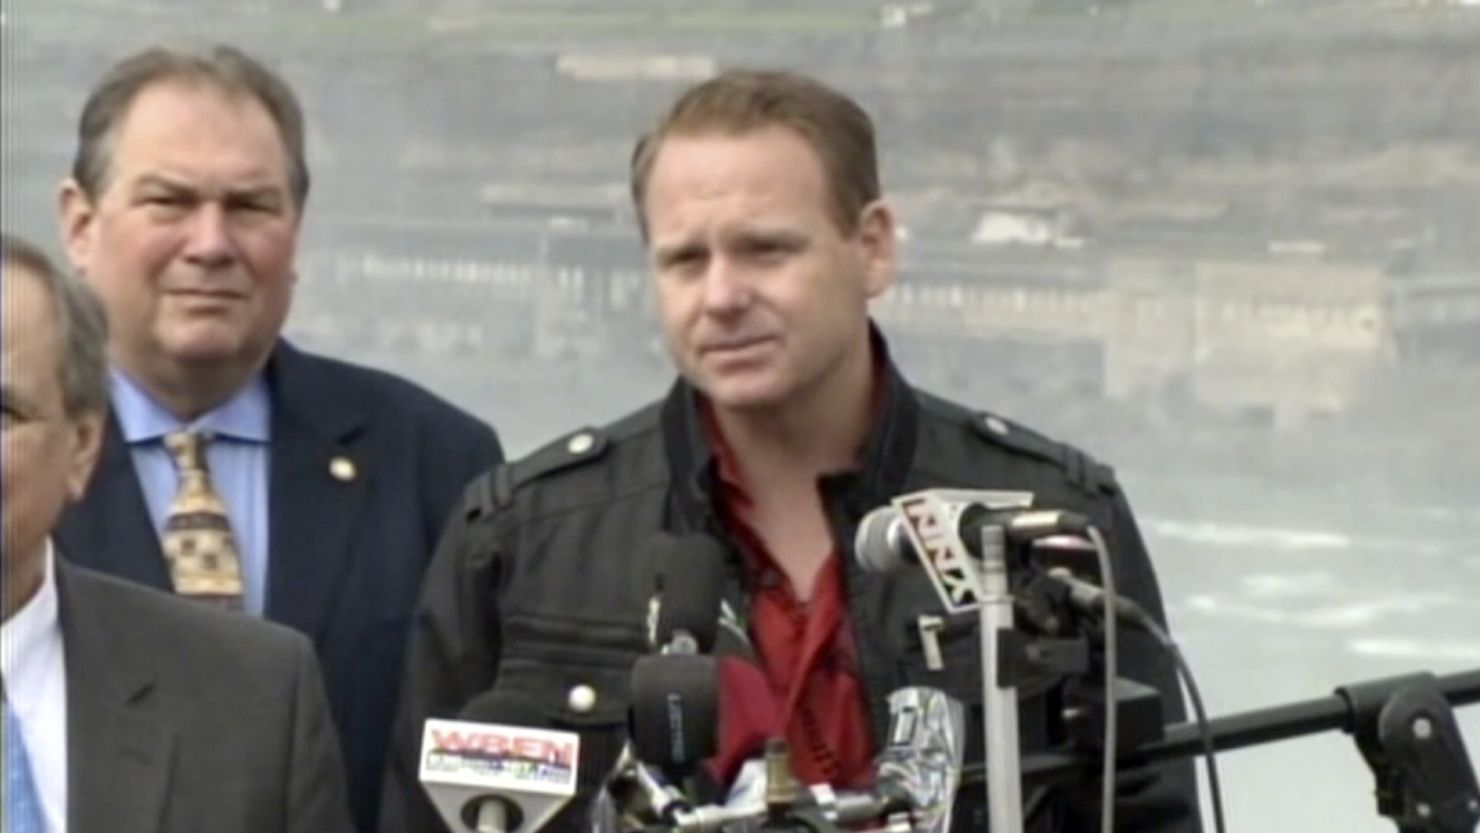 Daredevil Nik Wallenda expects to make his high-wire walk over Niagara Falls on June 15.